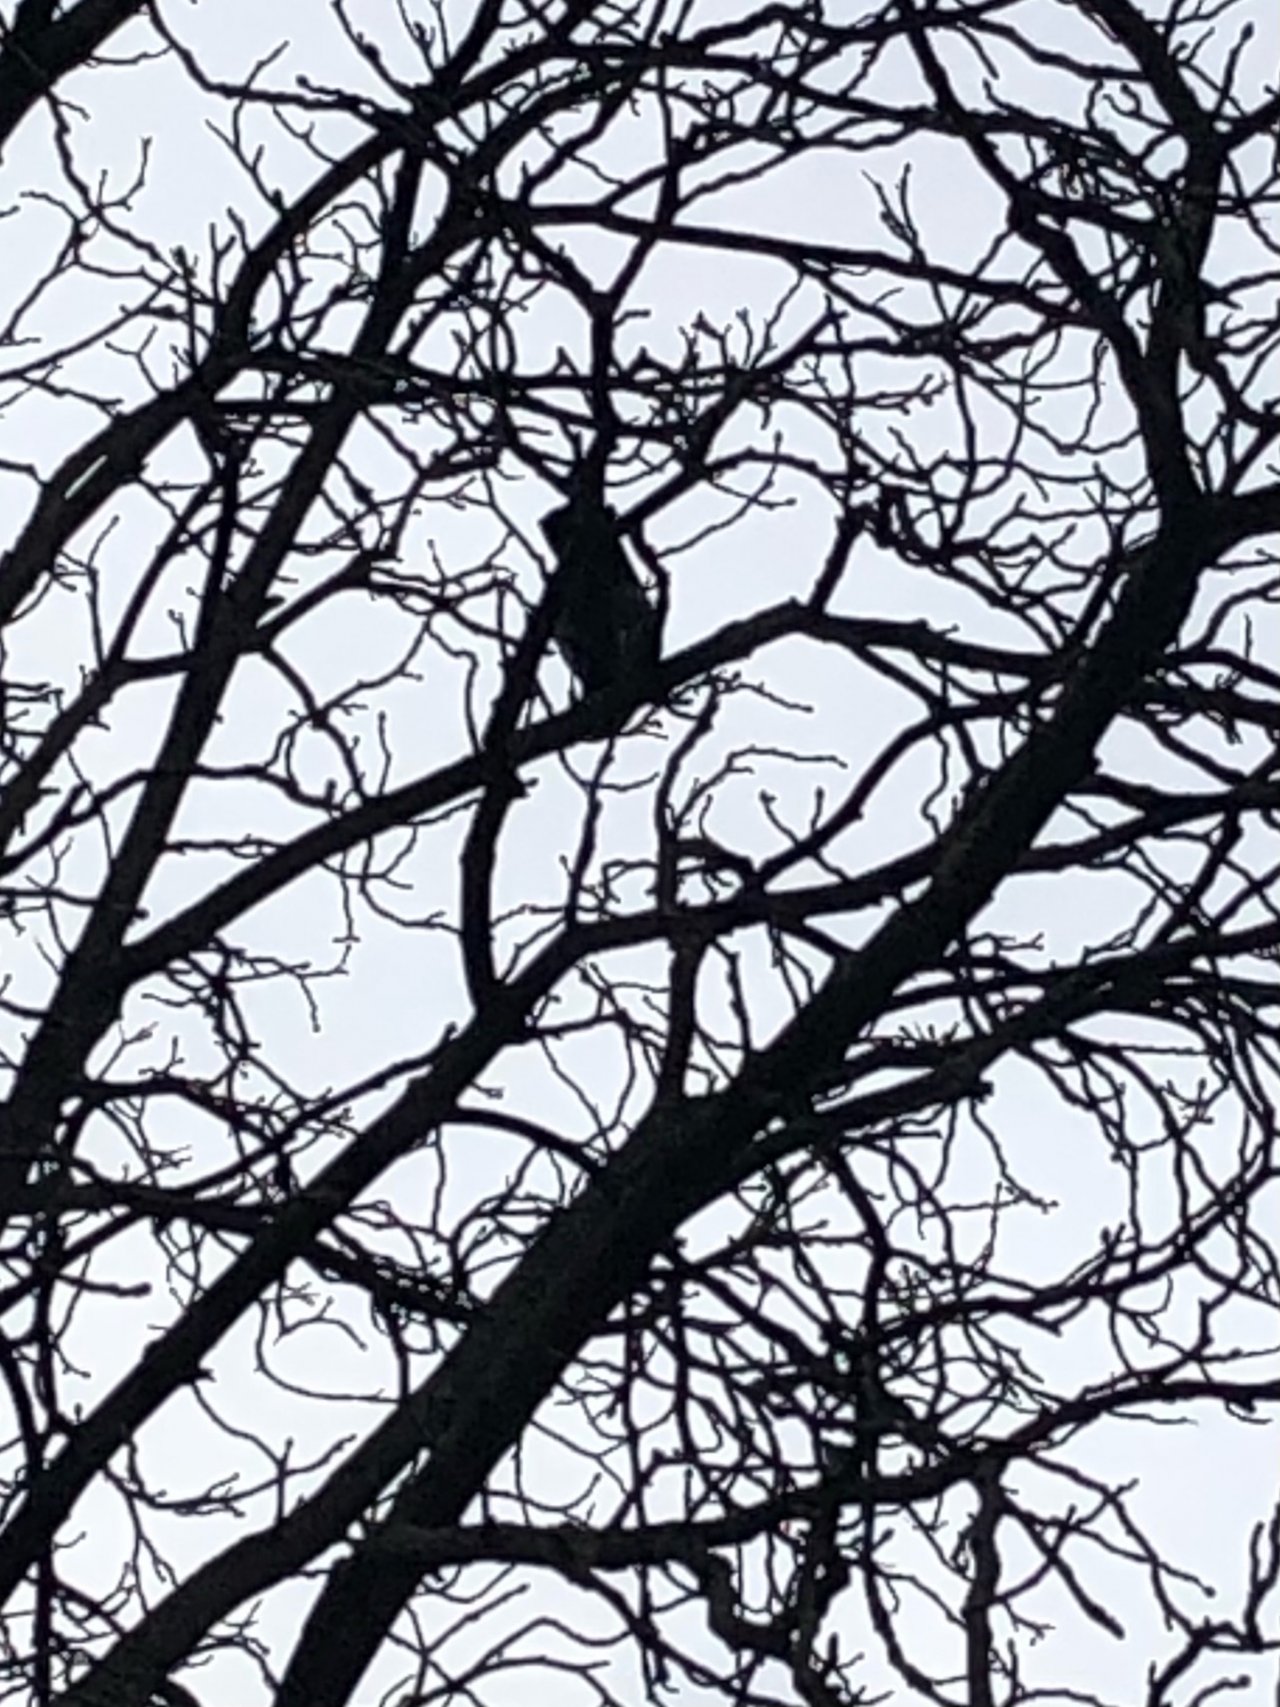 Carrion Crow in KraMobil App spotted by Krarin on 20.02.2021